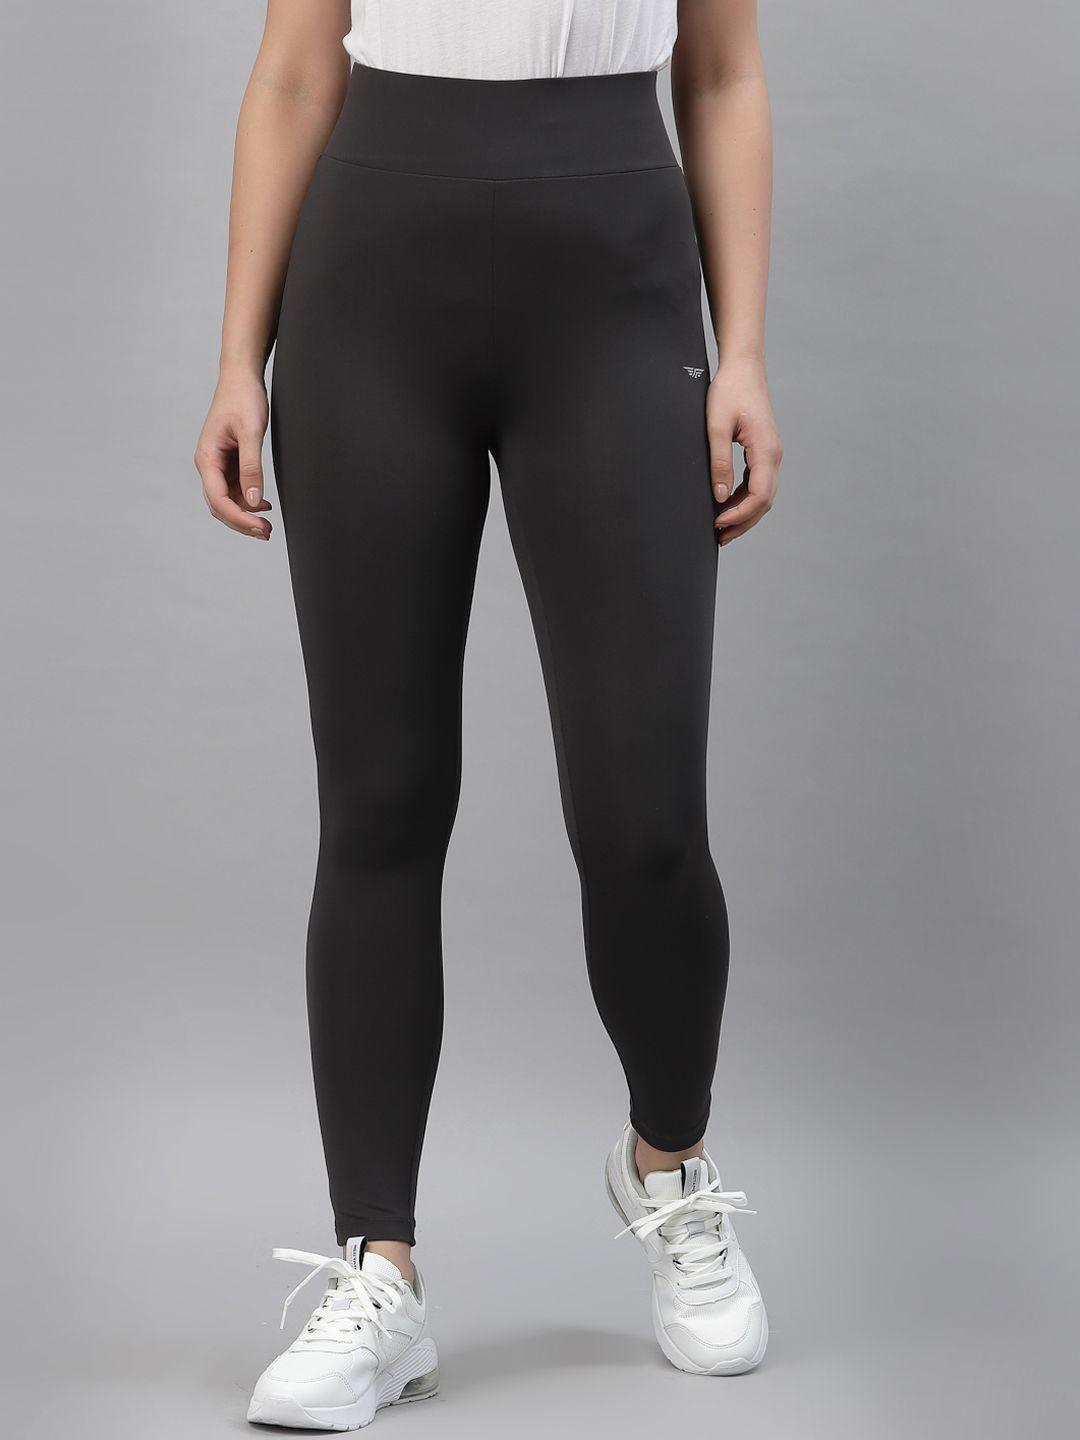 red tape women grey solid activewear tights